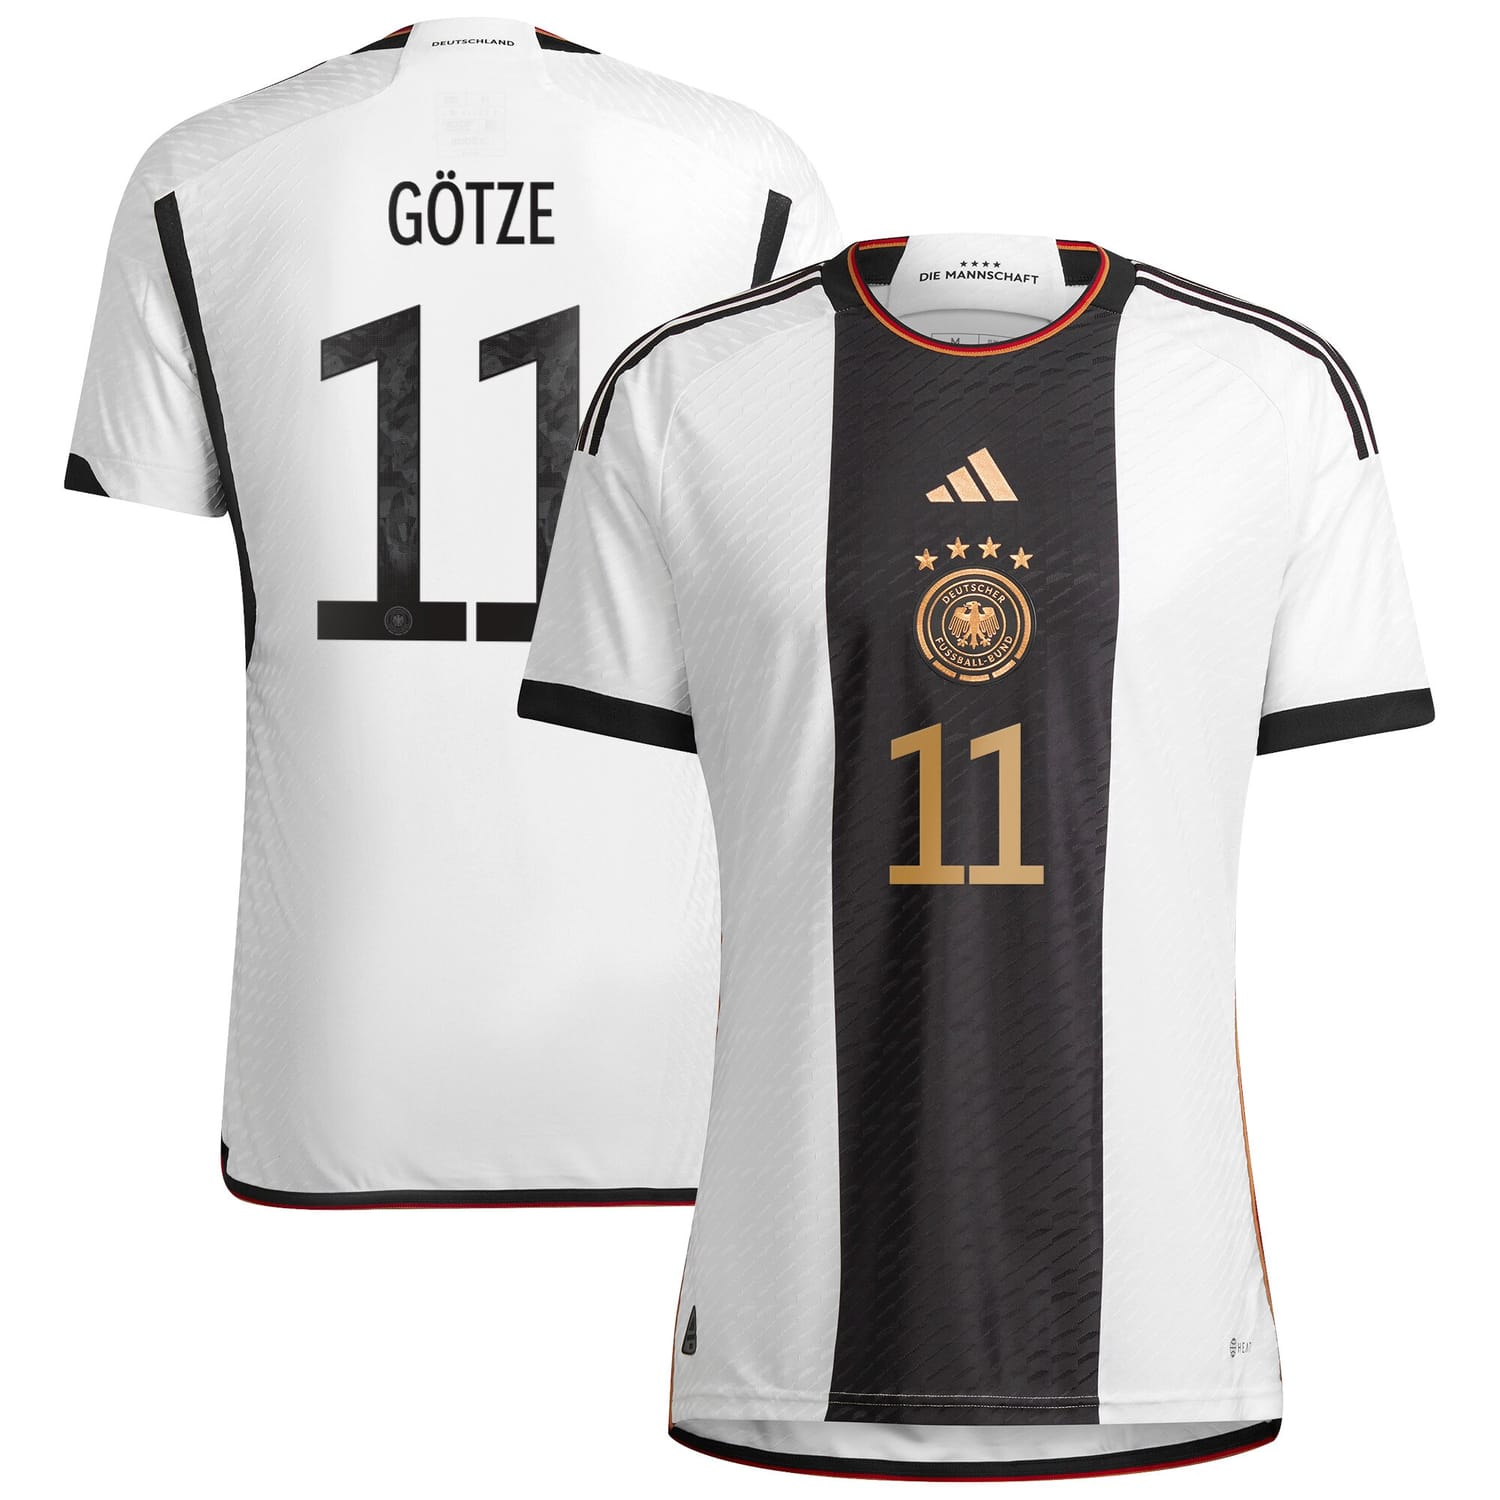 Germany National Team Home Authentic Jersey Shirt 2022 player Mario Götze 11 printing for Men